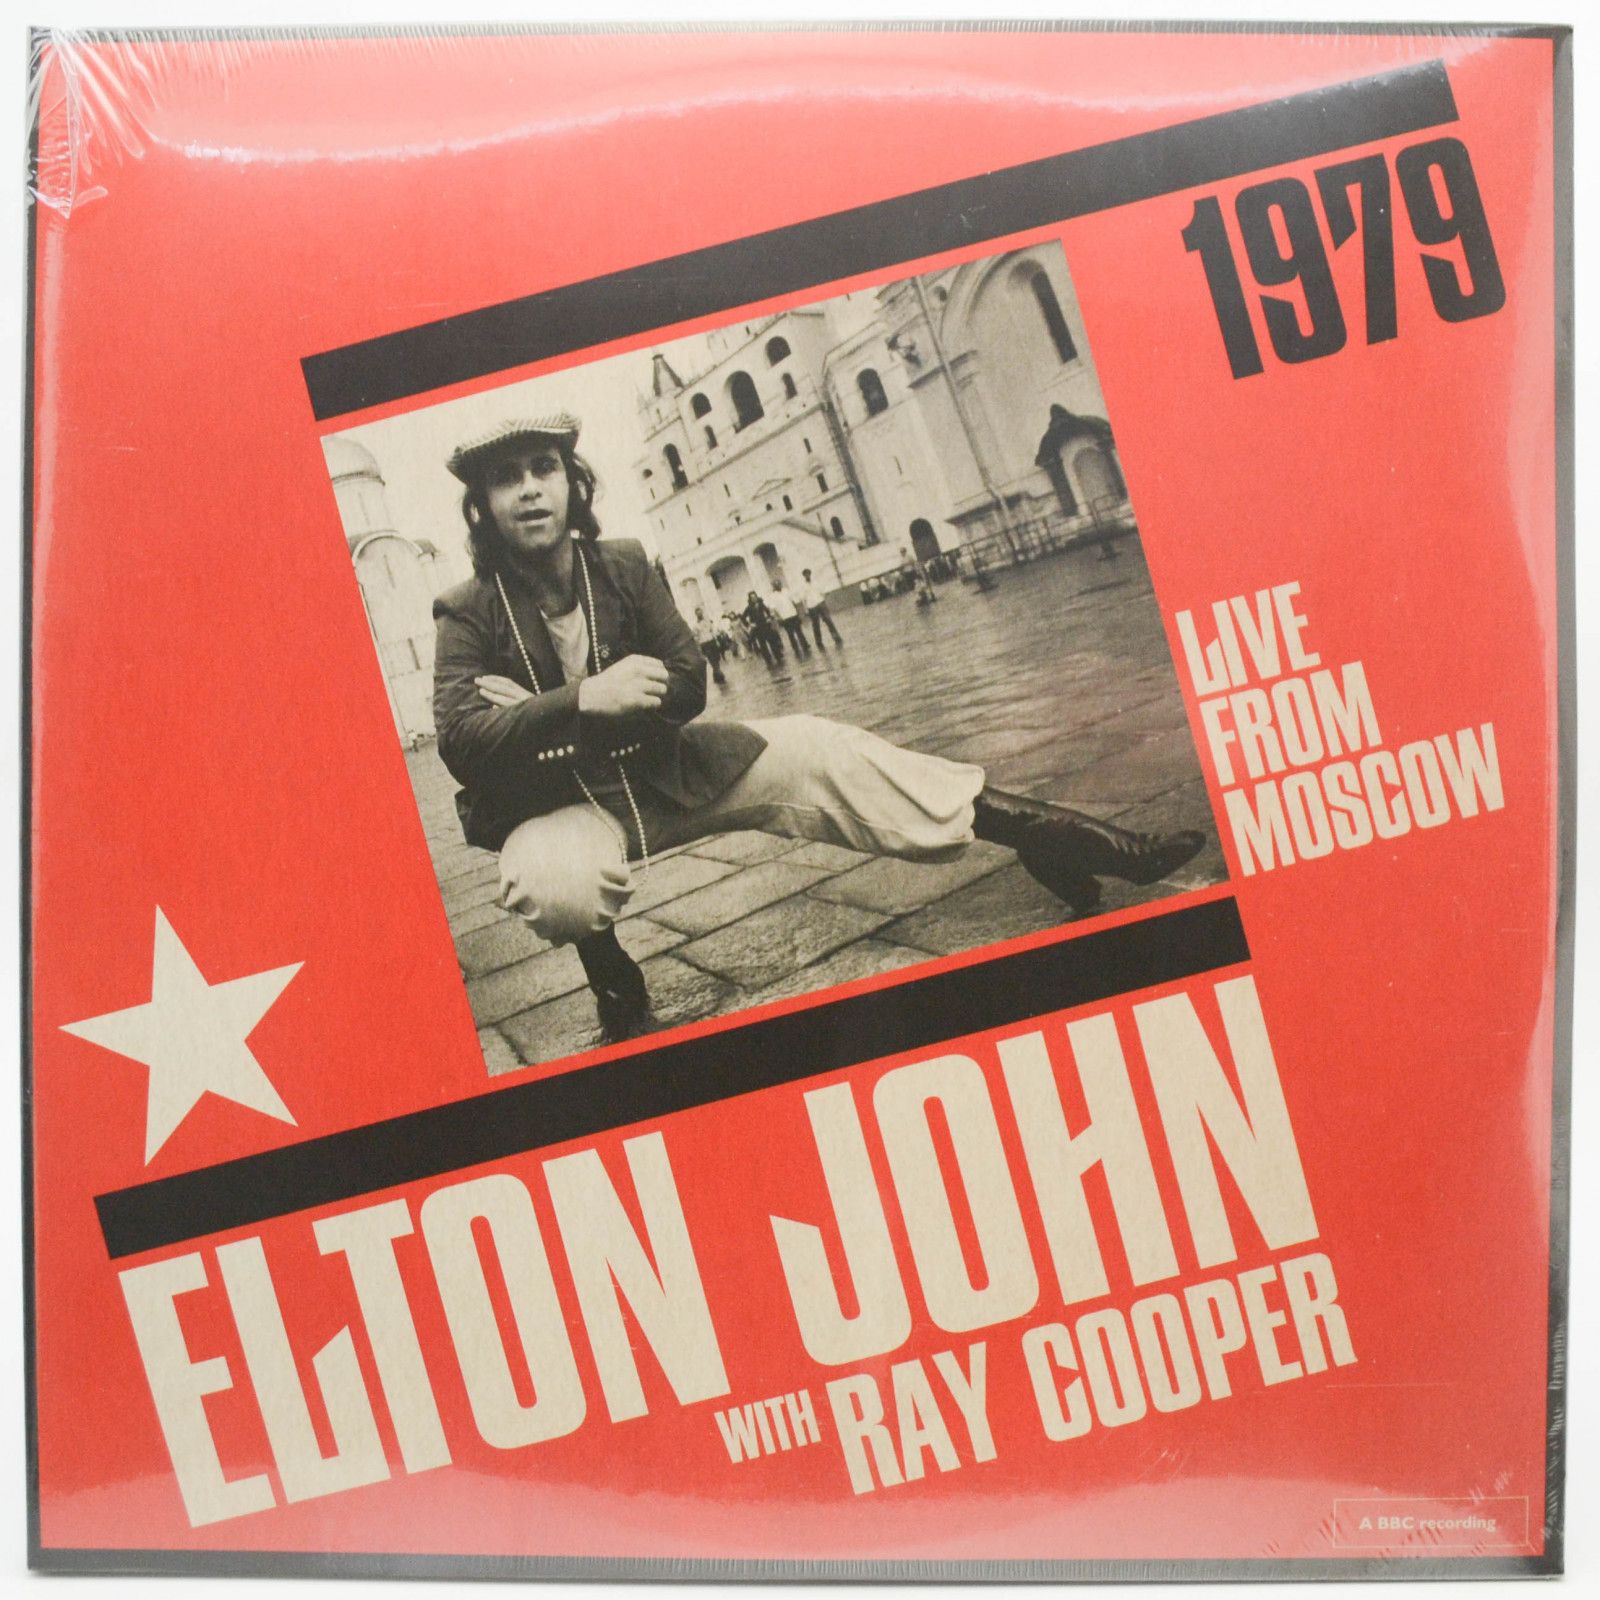 Elton John With Ray Cooper — Live From Moscow (2LP), 2019